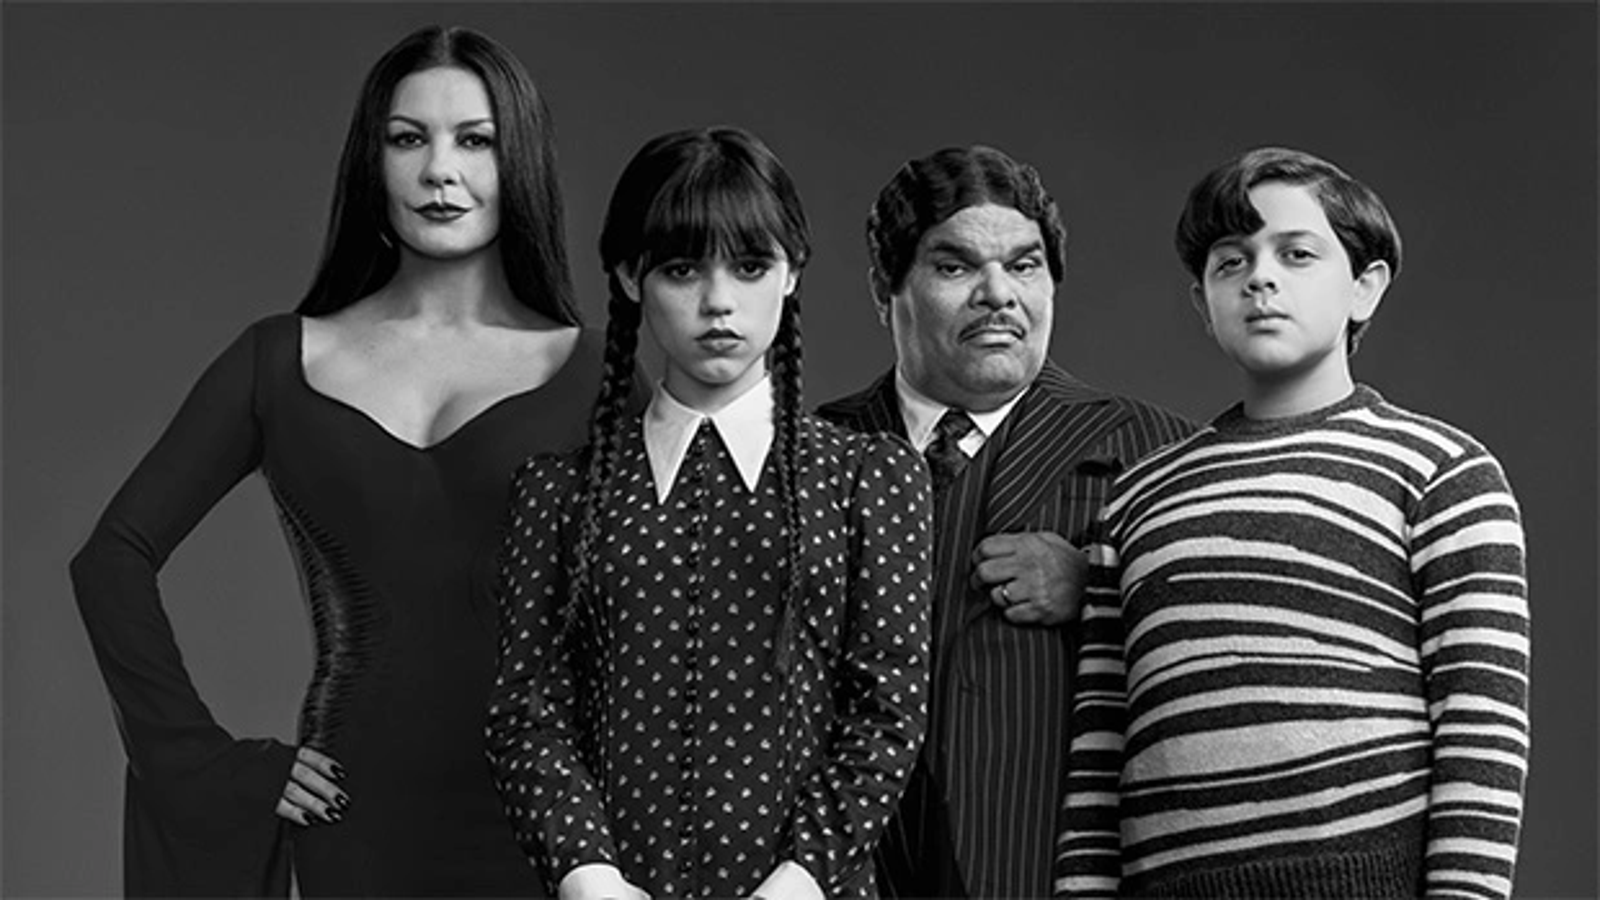 Wednesday: Netflix Sets Release Date for Addams Family Series